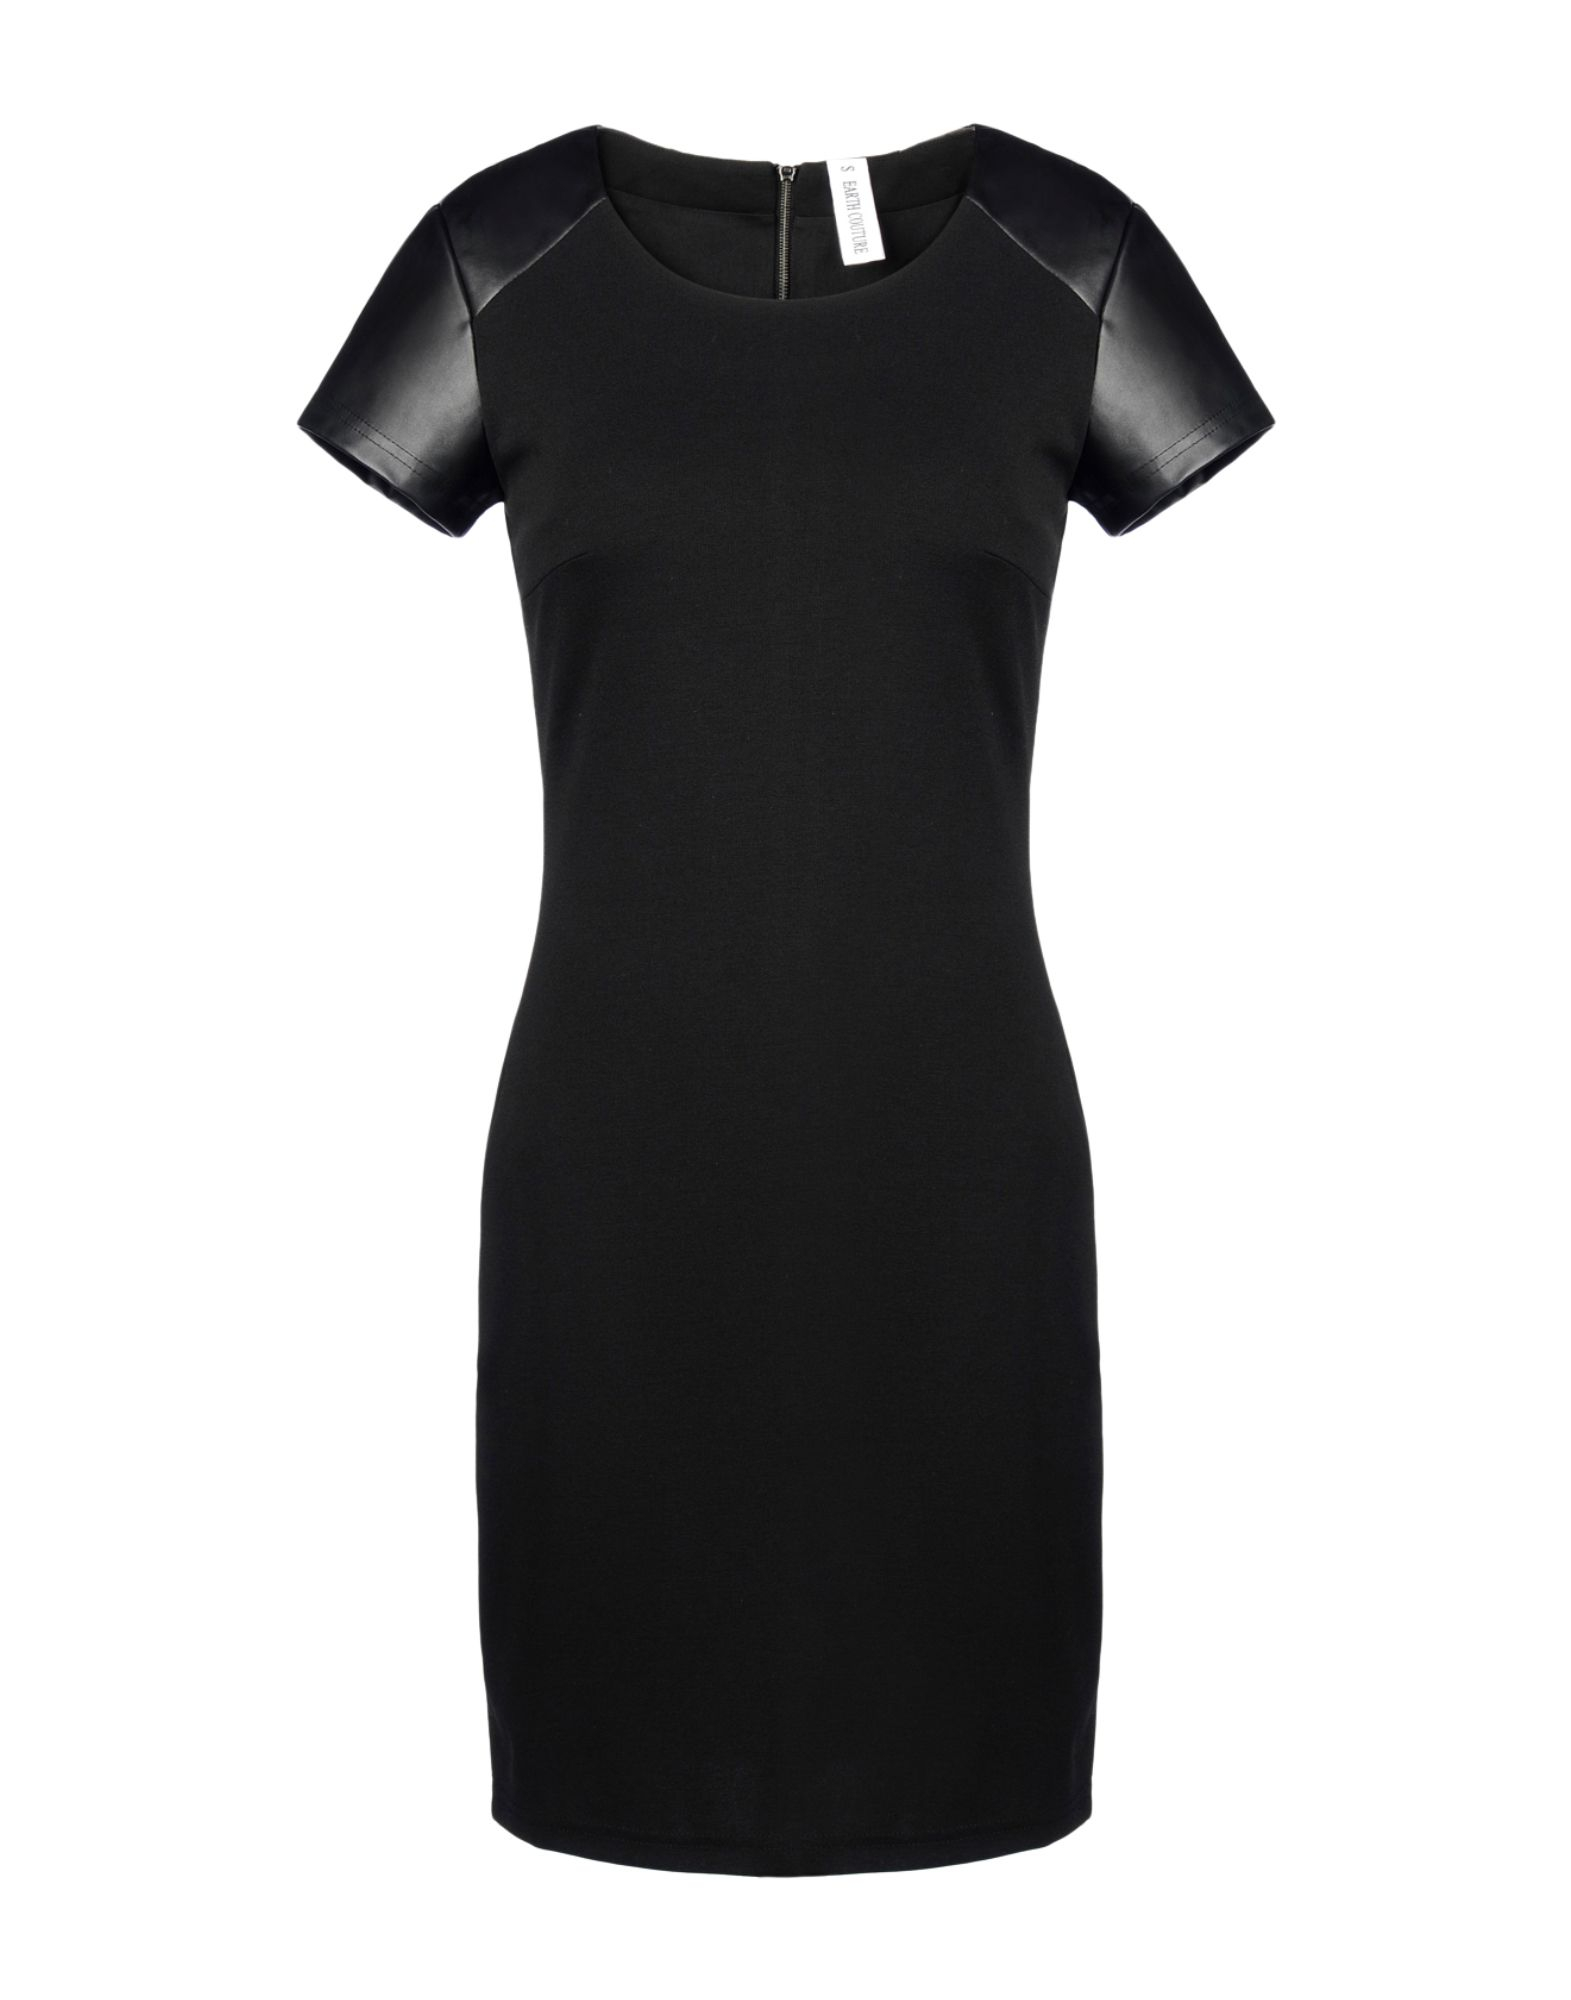 Lyst - Earth couture Short Dress in Black